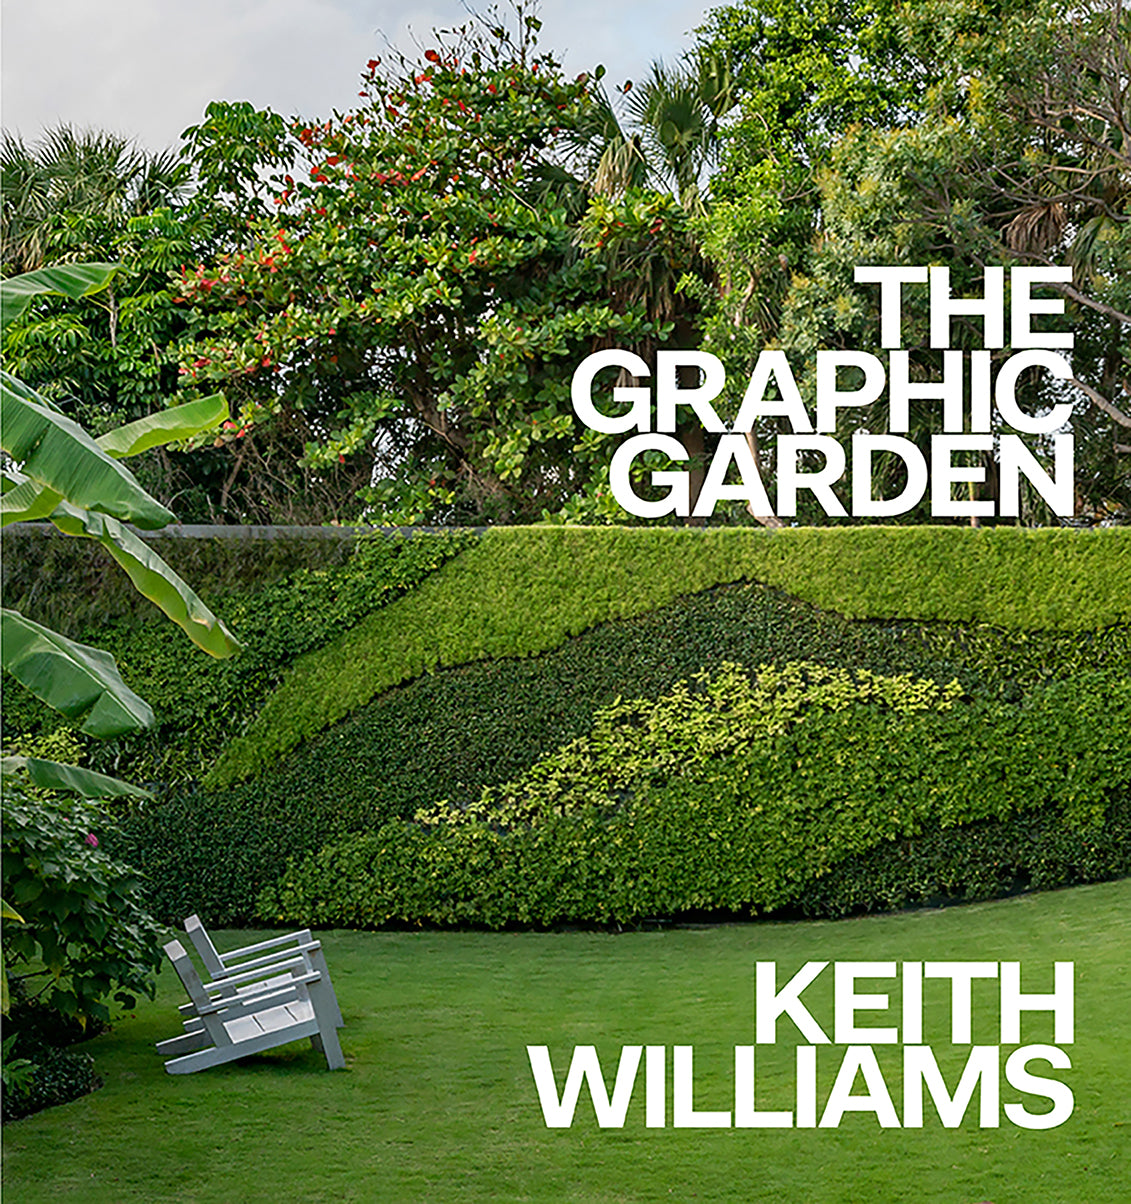 image of The Graphic Garden book cover